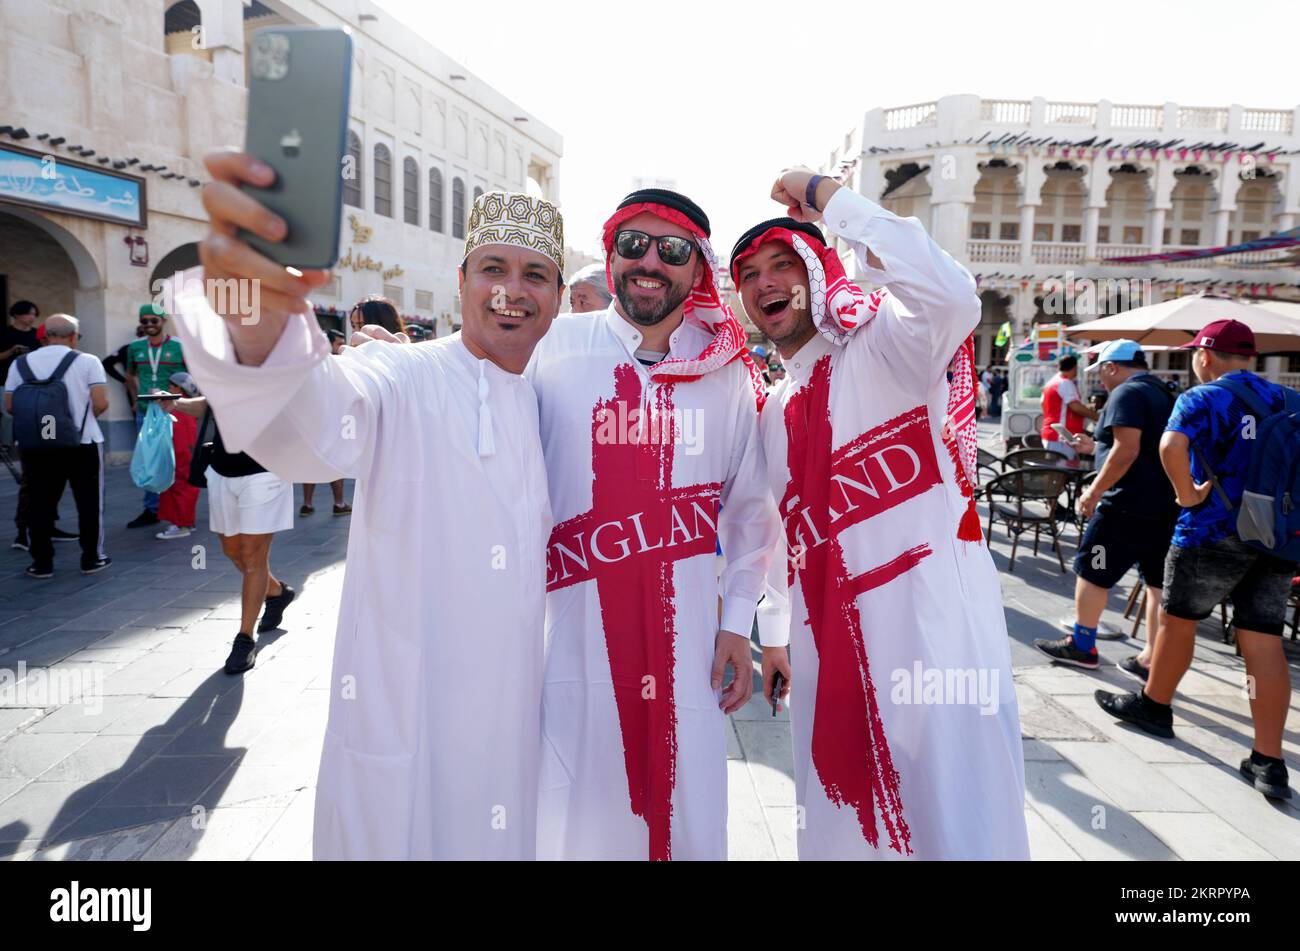 England fans pose for a photograph at a souq in Doha on the day of the FIFA World Cup Group B match between Wales and England. Picture date: Tuesday November 29, 2022. Stock Photo